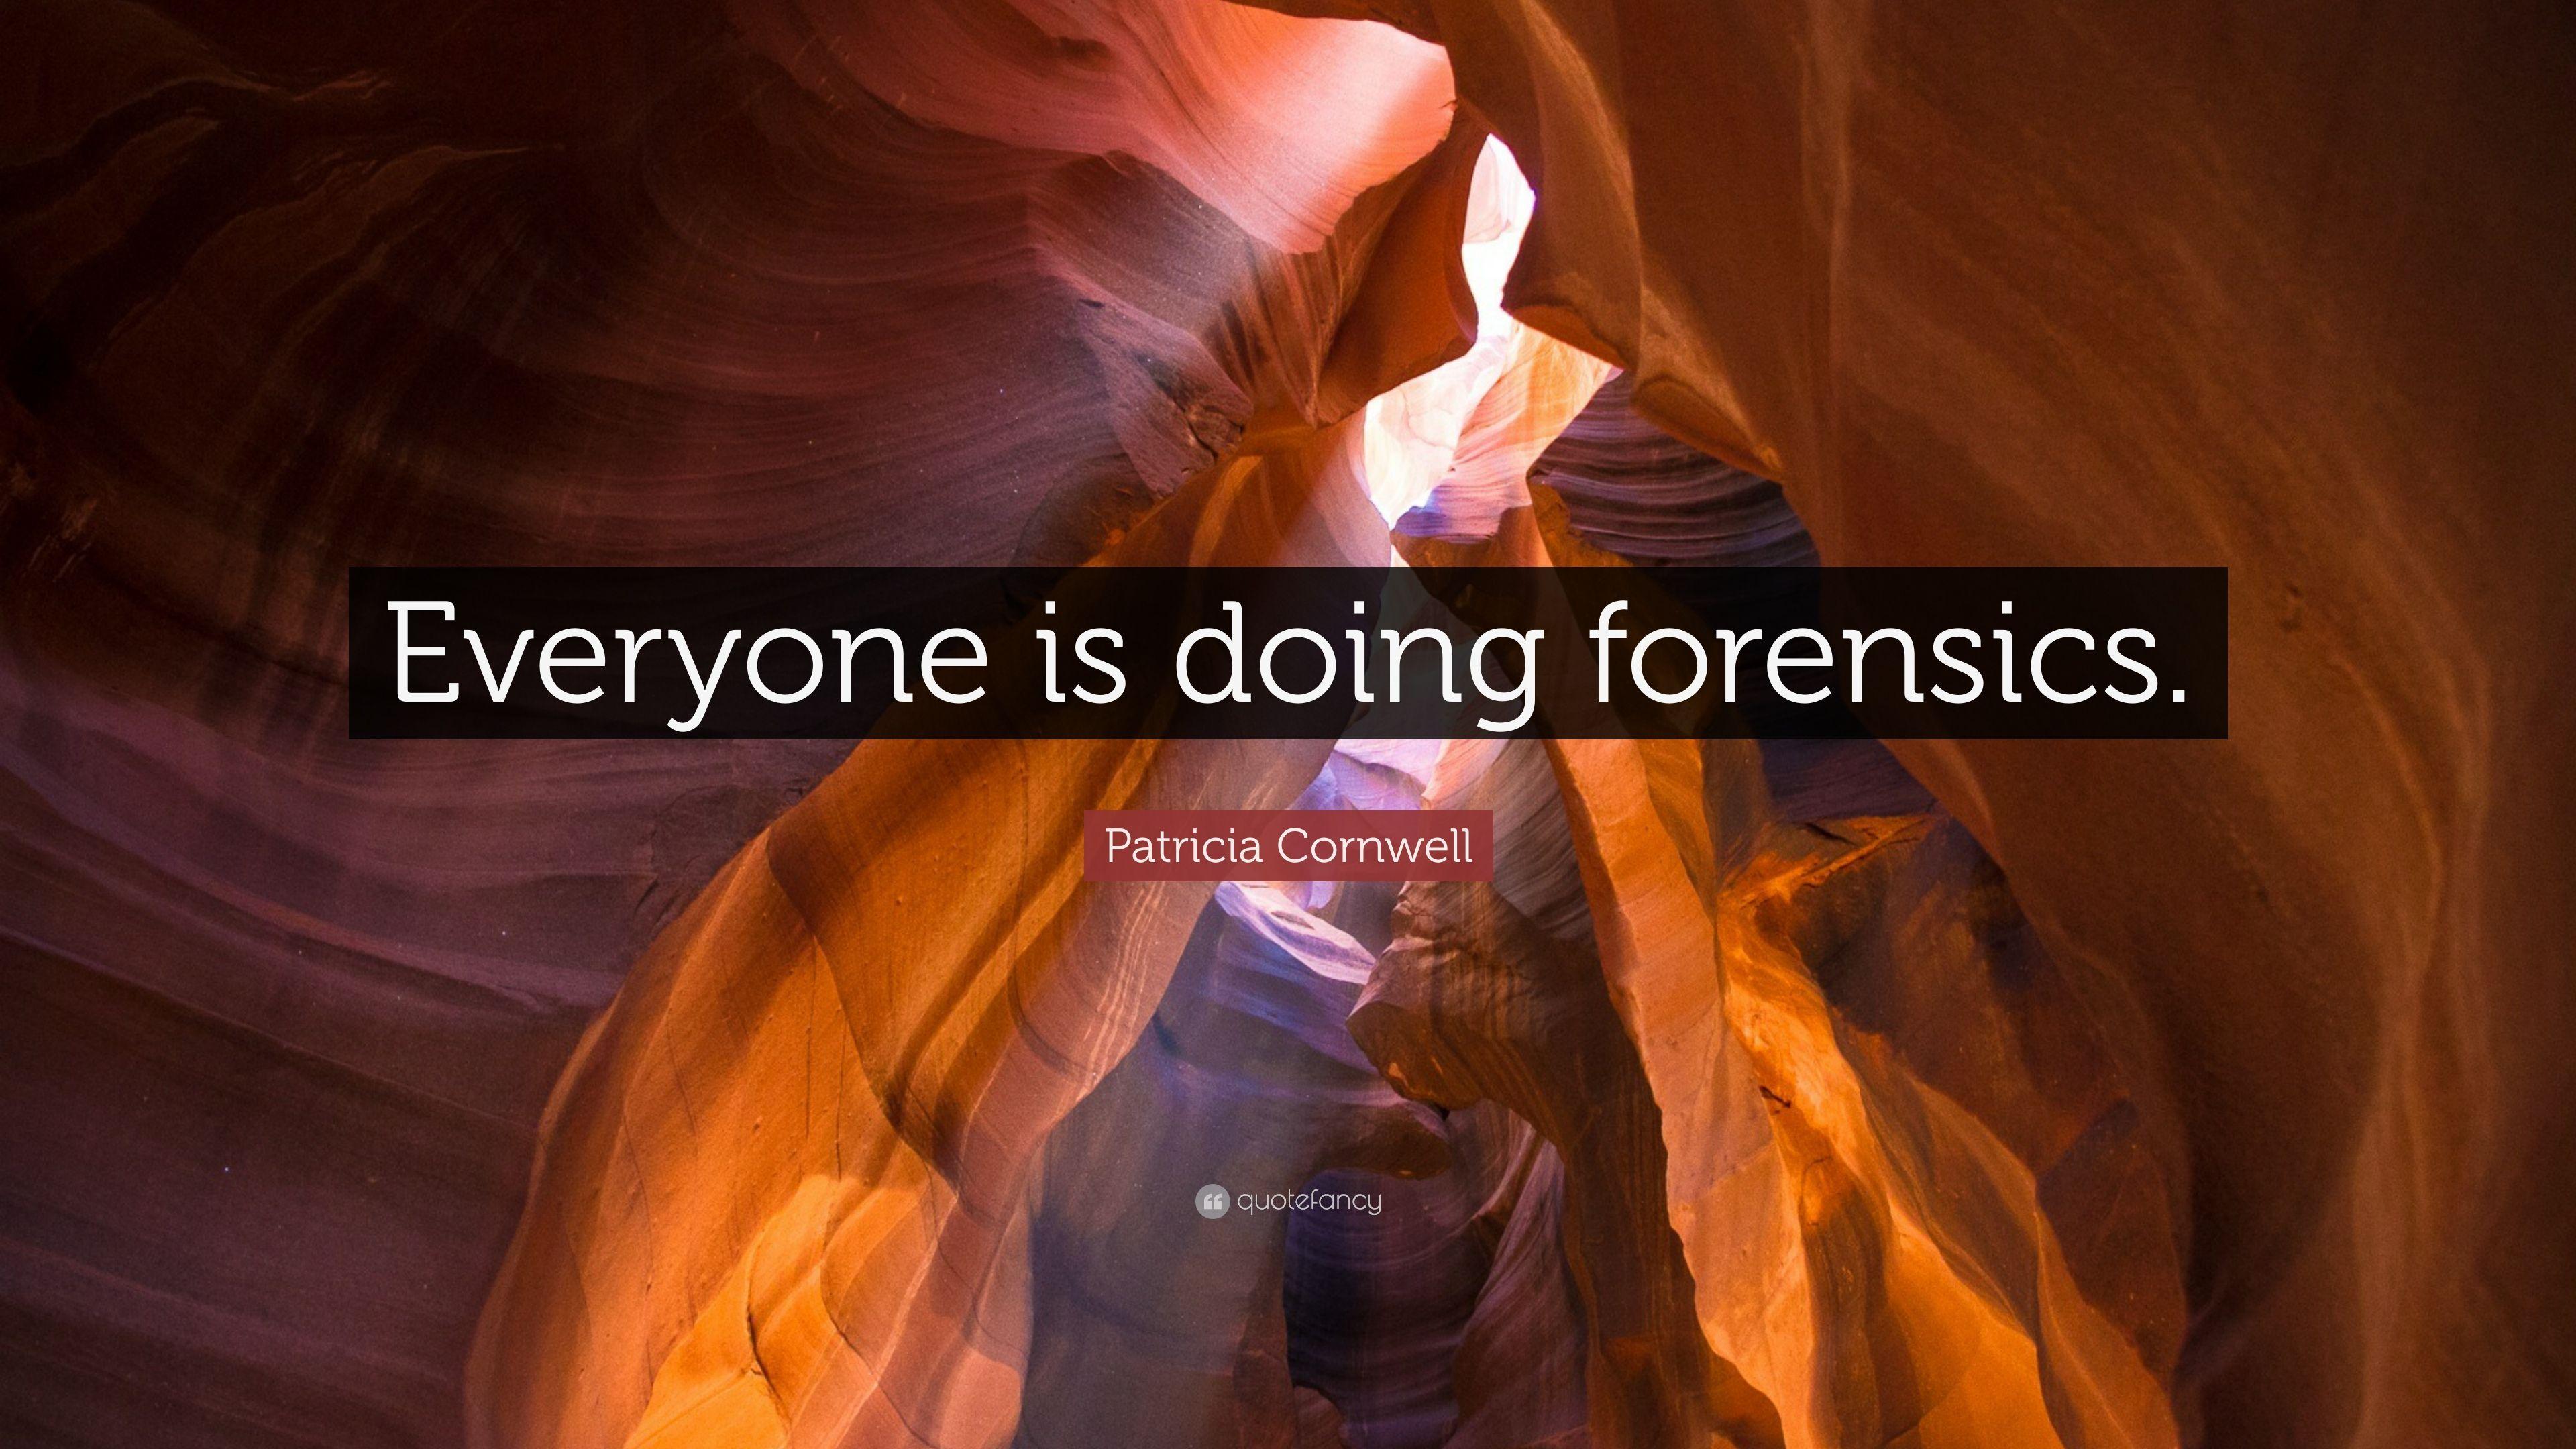 Patricia Cornwell Quote: “Everyone is doing forensics.” 7